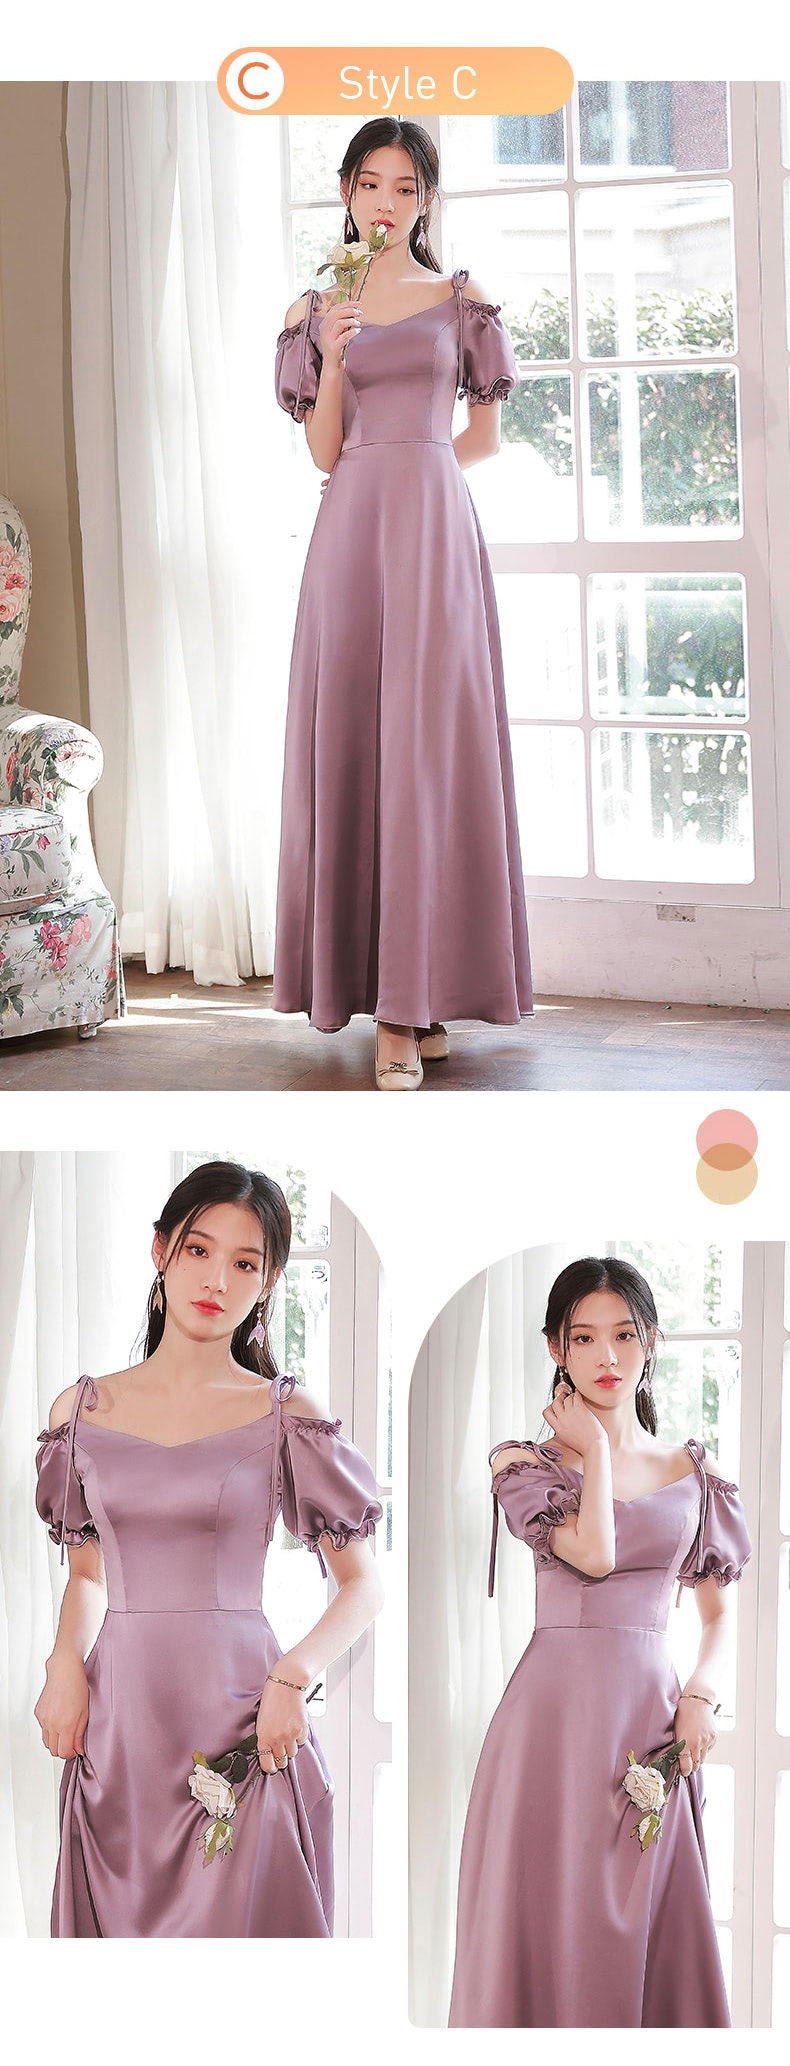 Sweet-Sexy-Purple-Satin-Bridesmaid-Long-Dress-Party-Casual-Ball-Gown18.jpg